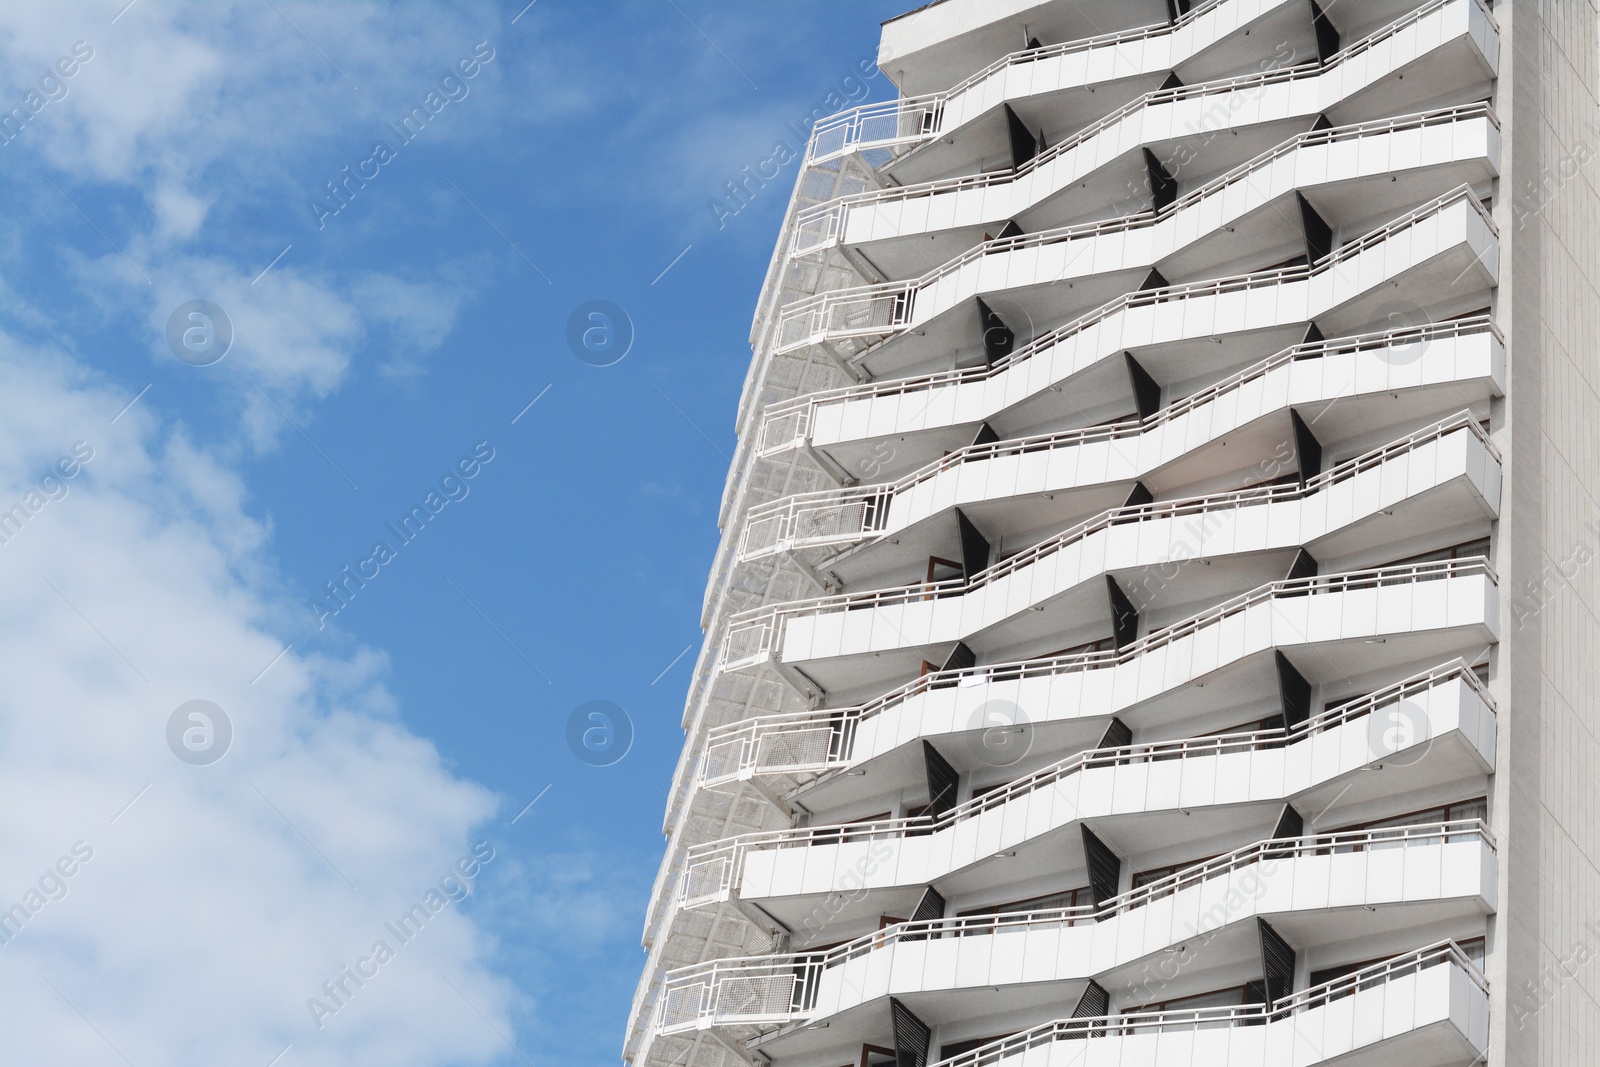 Photo of Exterior of beautiful building with balconies against blue sky, low angle view. Space for text